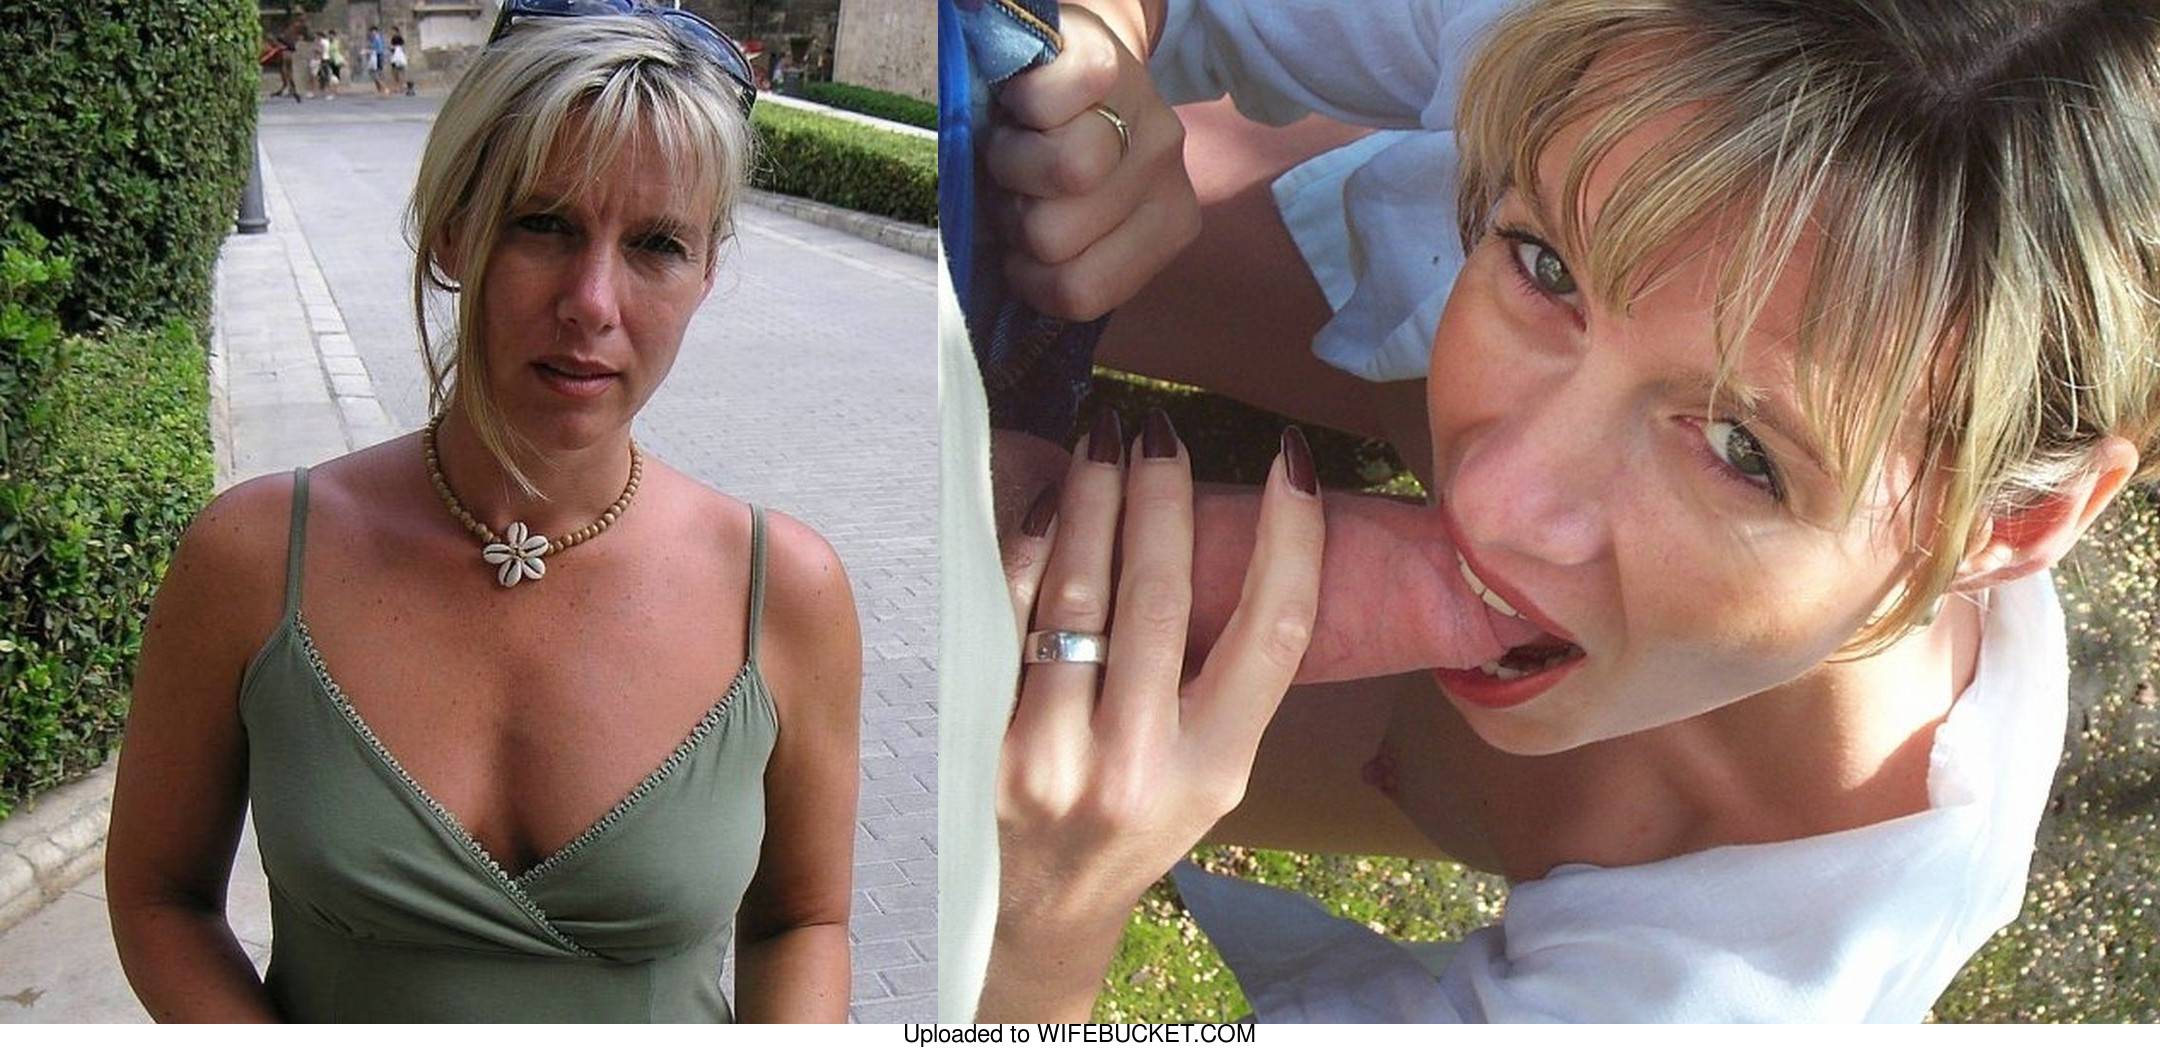 Before And After Wives Blowjob - 40 (yes, FOURTY) before-after blowjobs pics exposing real wives from our  archive! â€“ WifeBucket | Offical MILF Blog